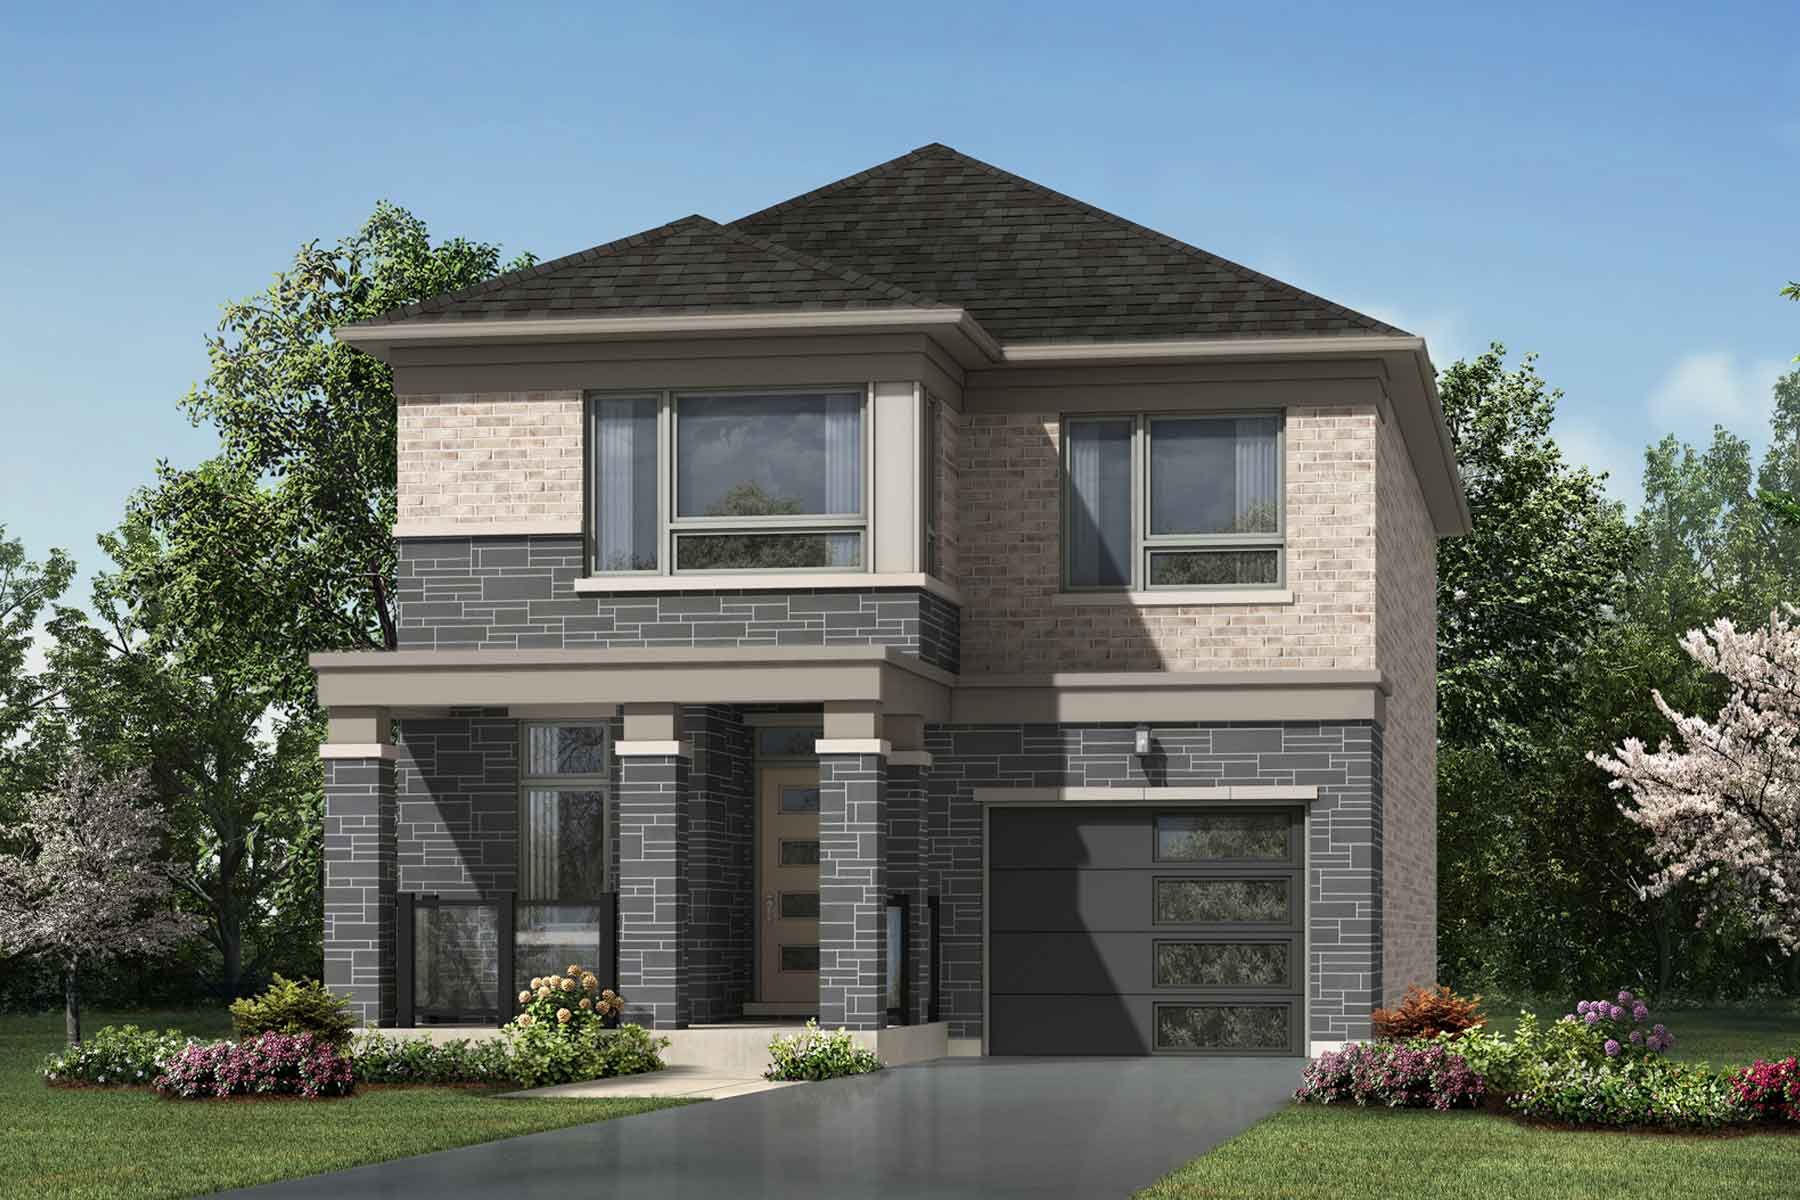 A Modern style single family home with a single car garage.